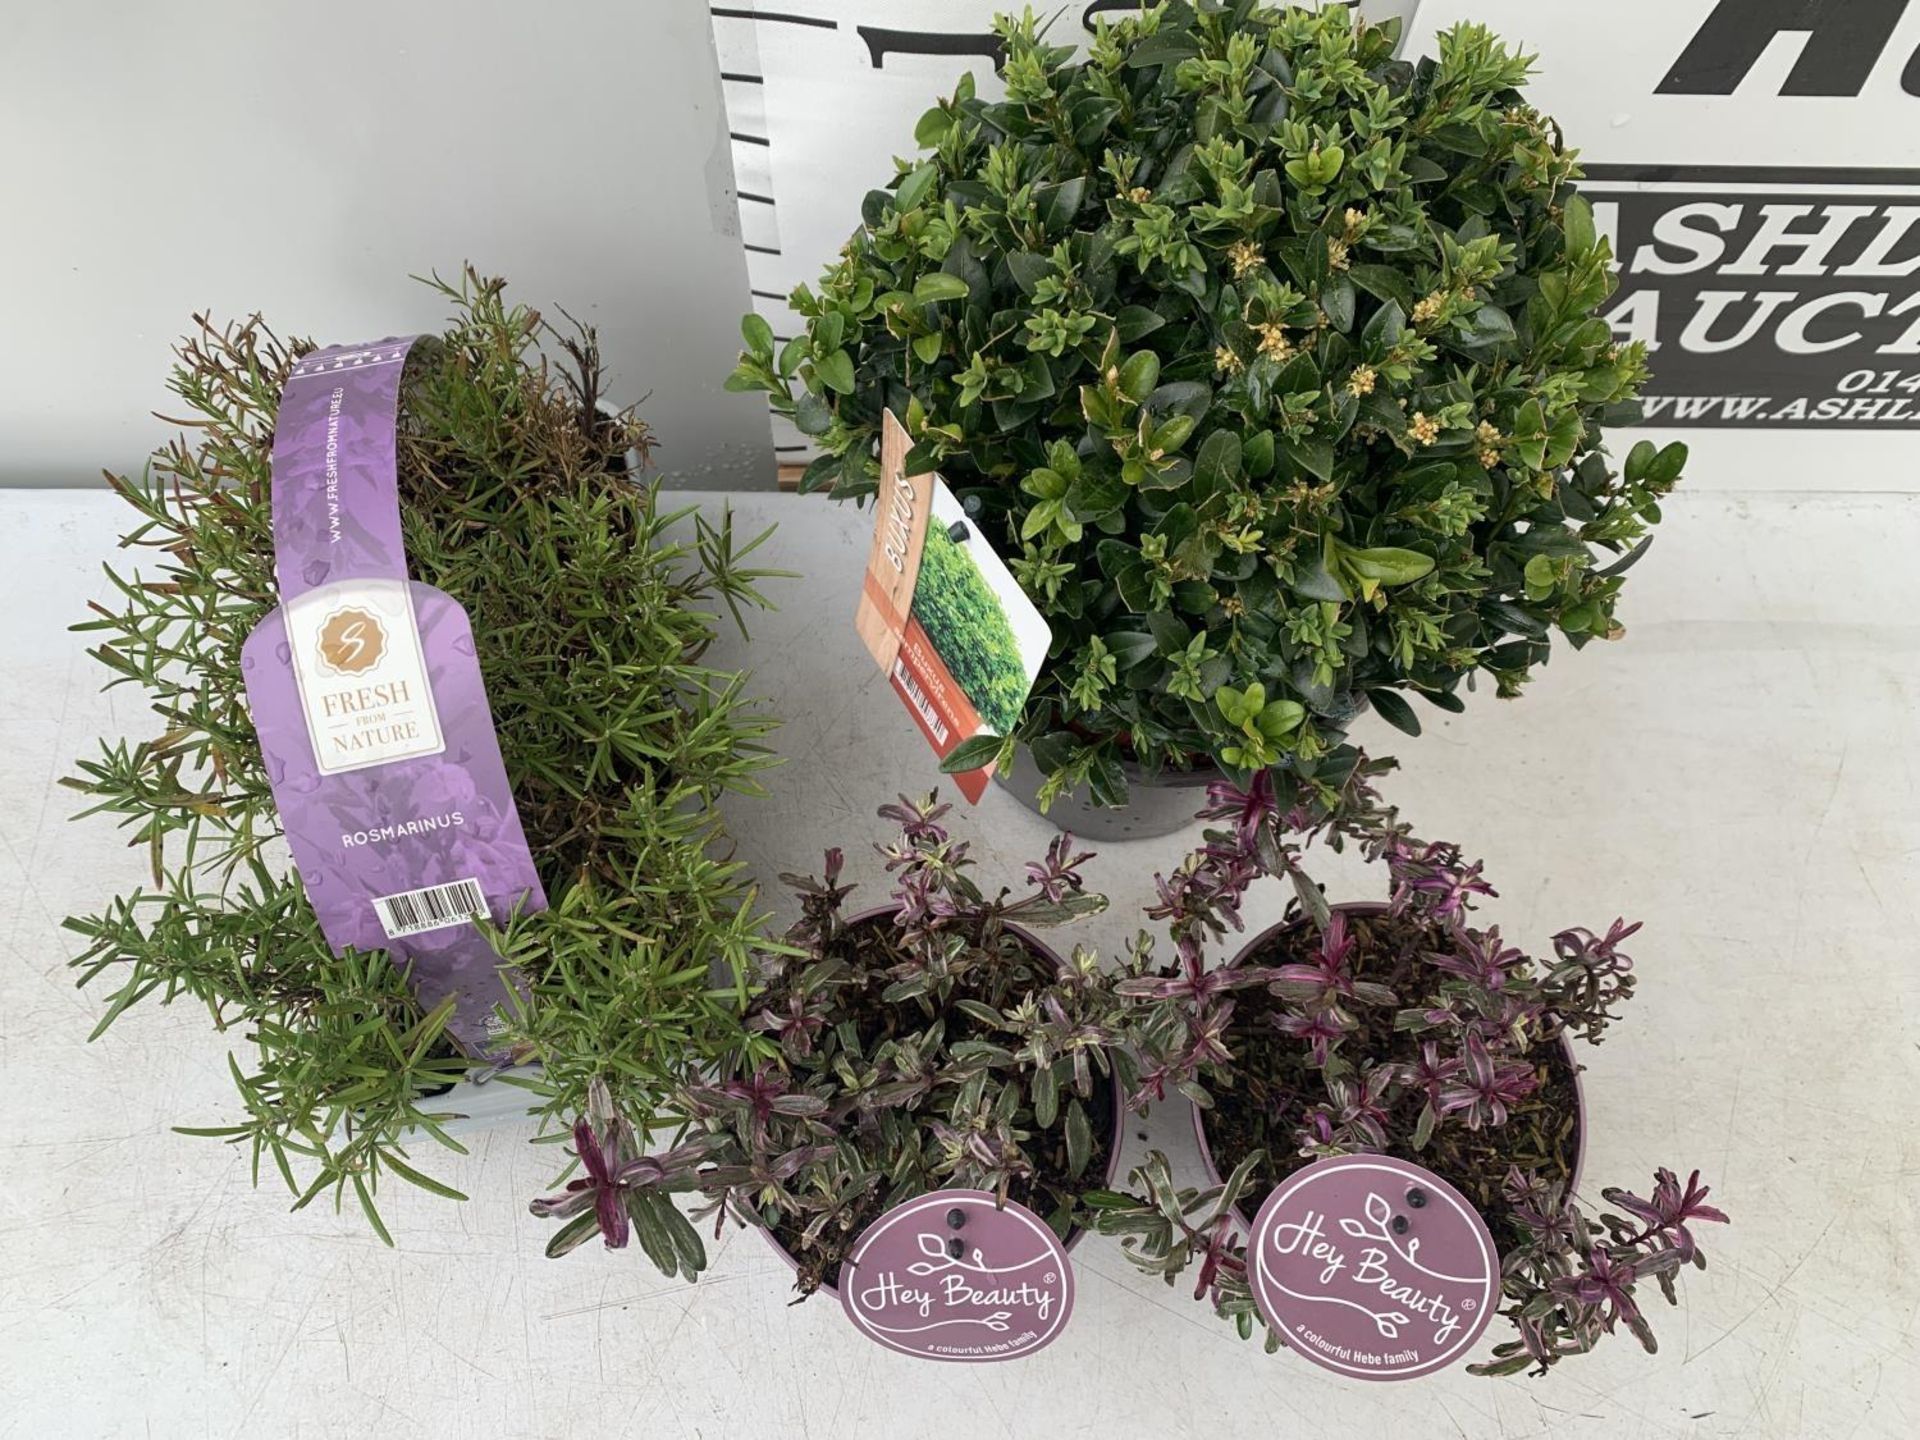 MIXED LOT OF PLANTS - ONE BUXUS SEMPERVIRENS IN A 2 LTR POT, SIX ROSEMARY PLUG PLANTS IN A CARRY - Image 4 of 10